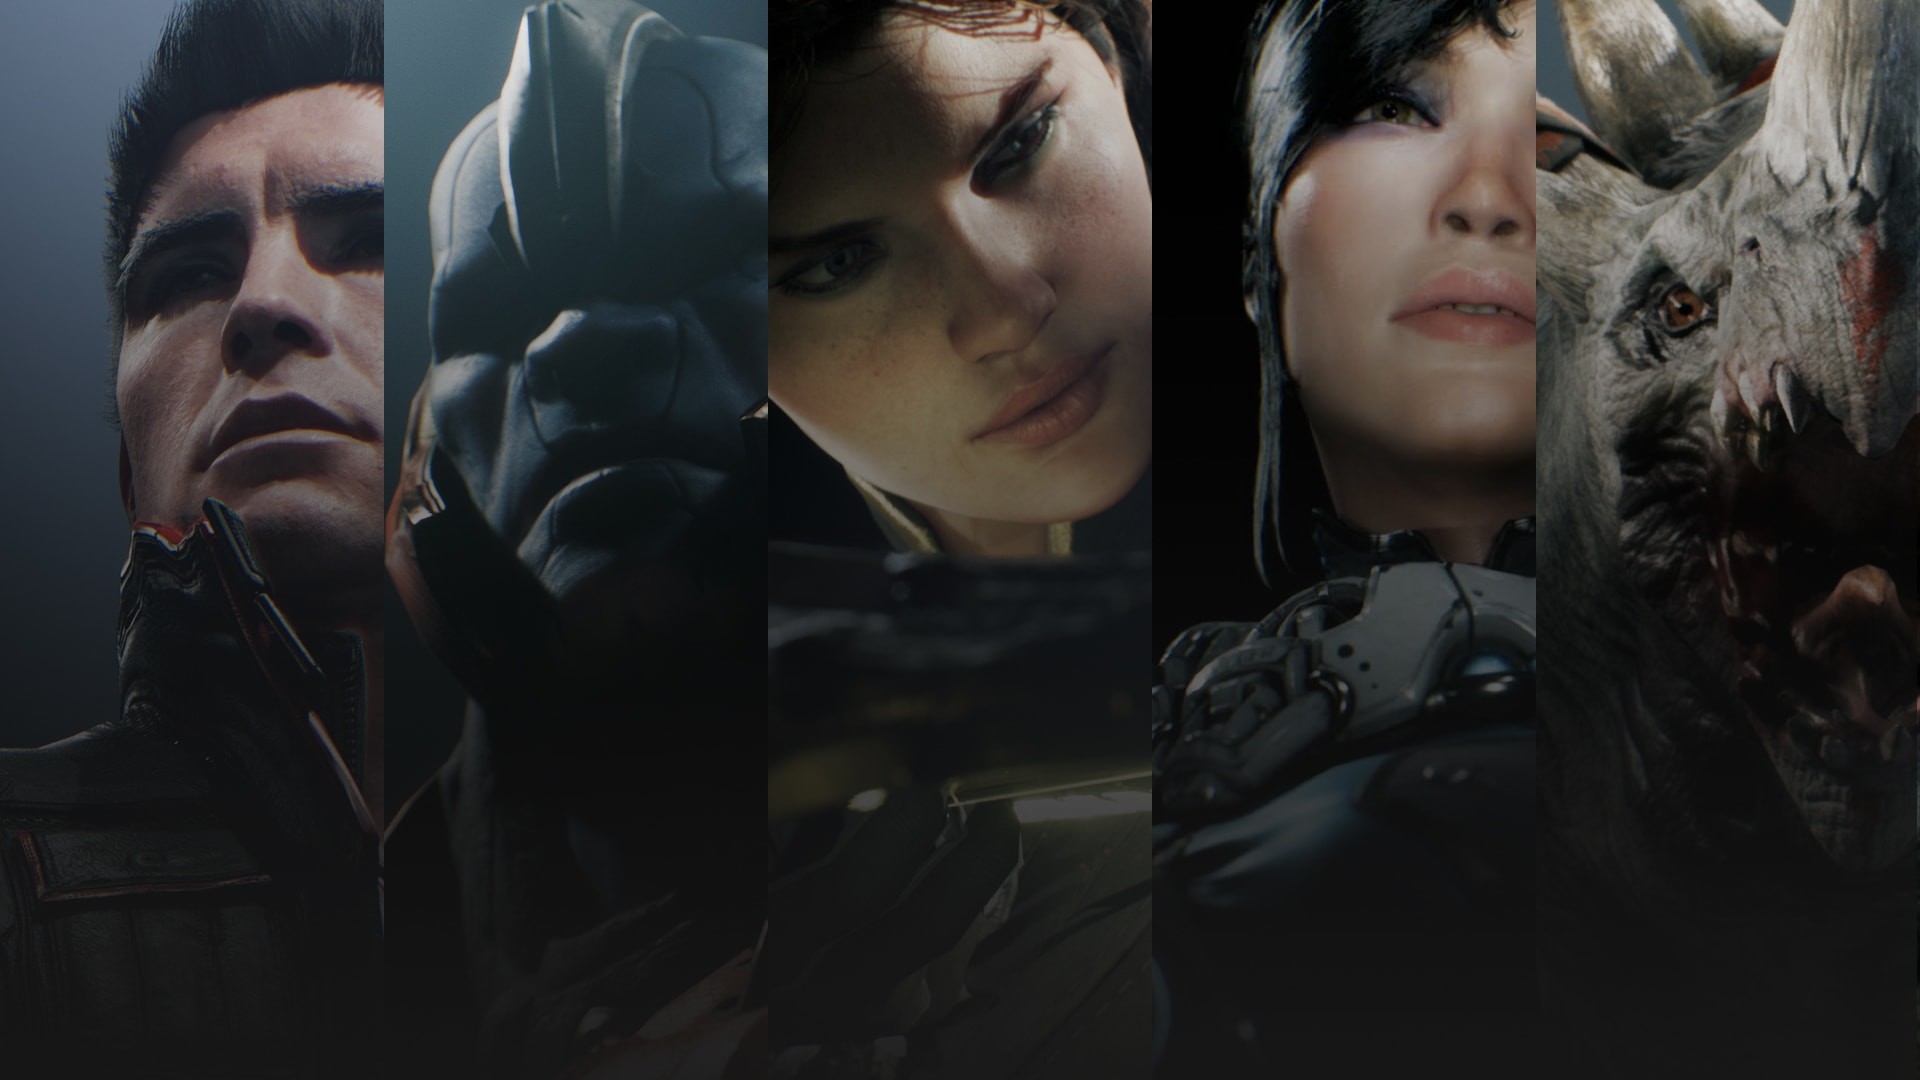 1920x1080 ... Images for Paragon - Resolution  | New Background Pictures ...